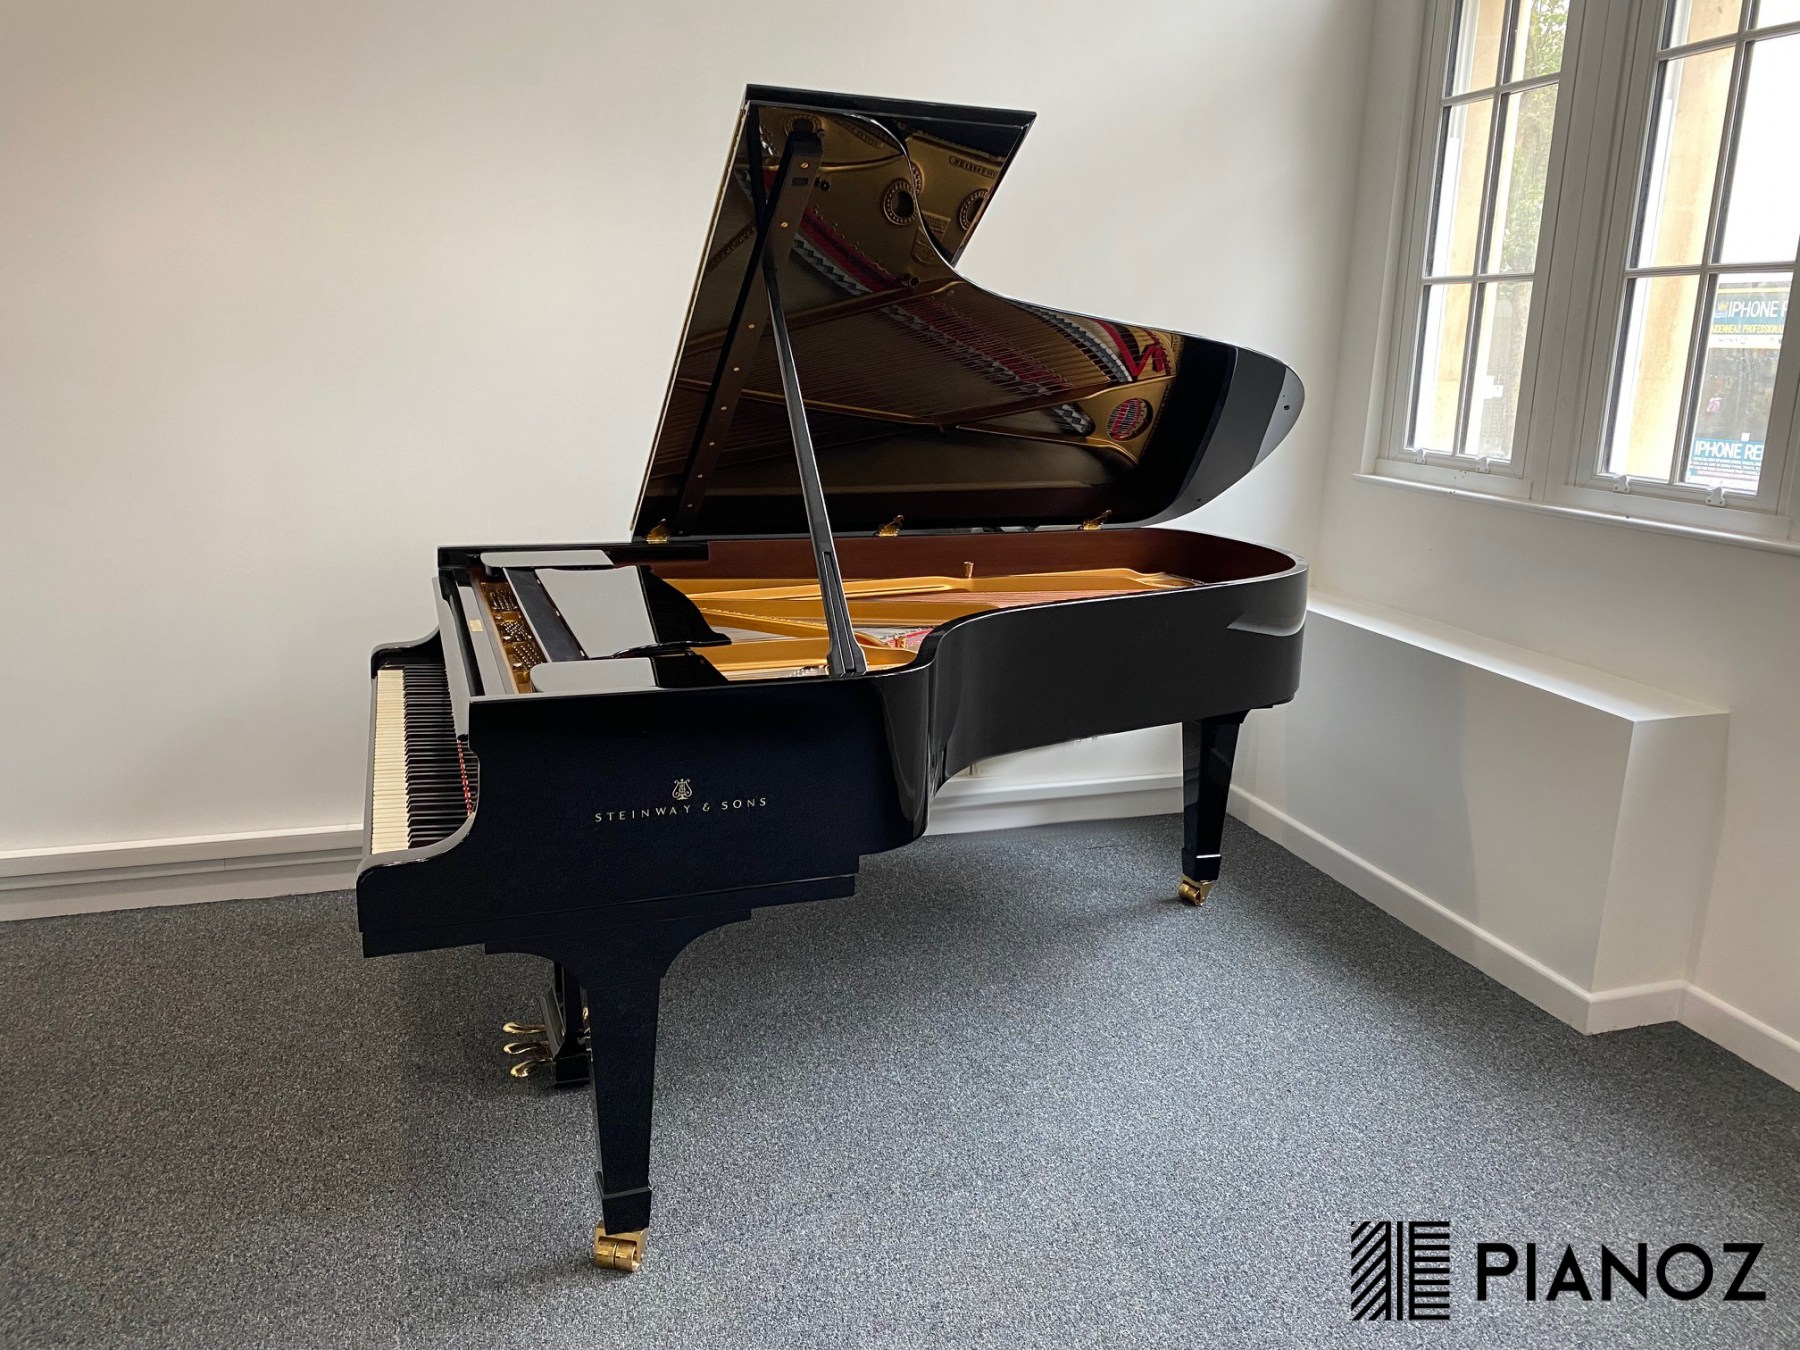 Steinway & Sons  Model C 224  Concert Grand piano for sale in UK